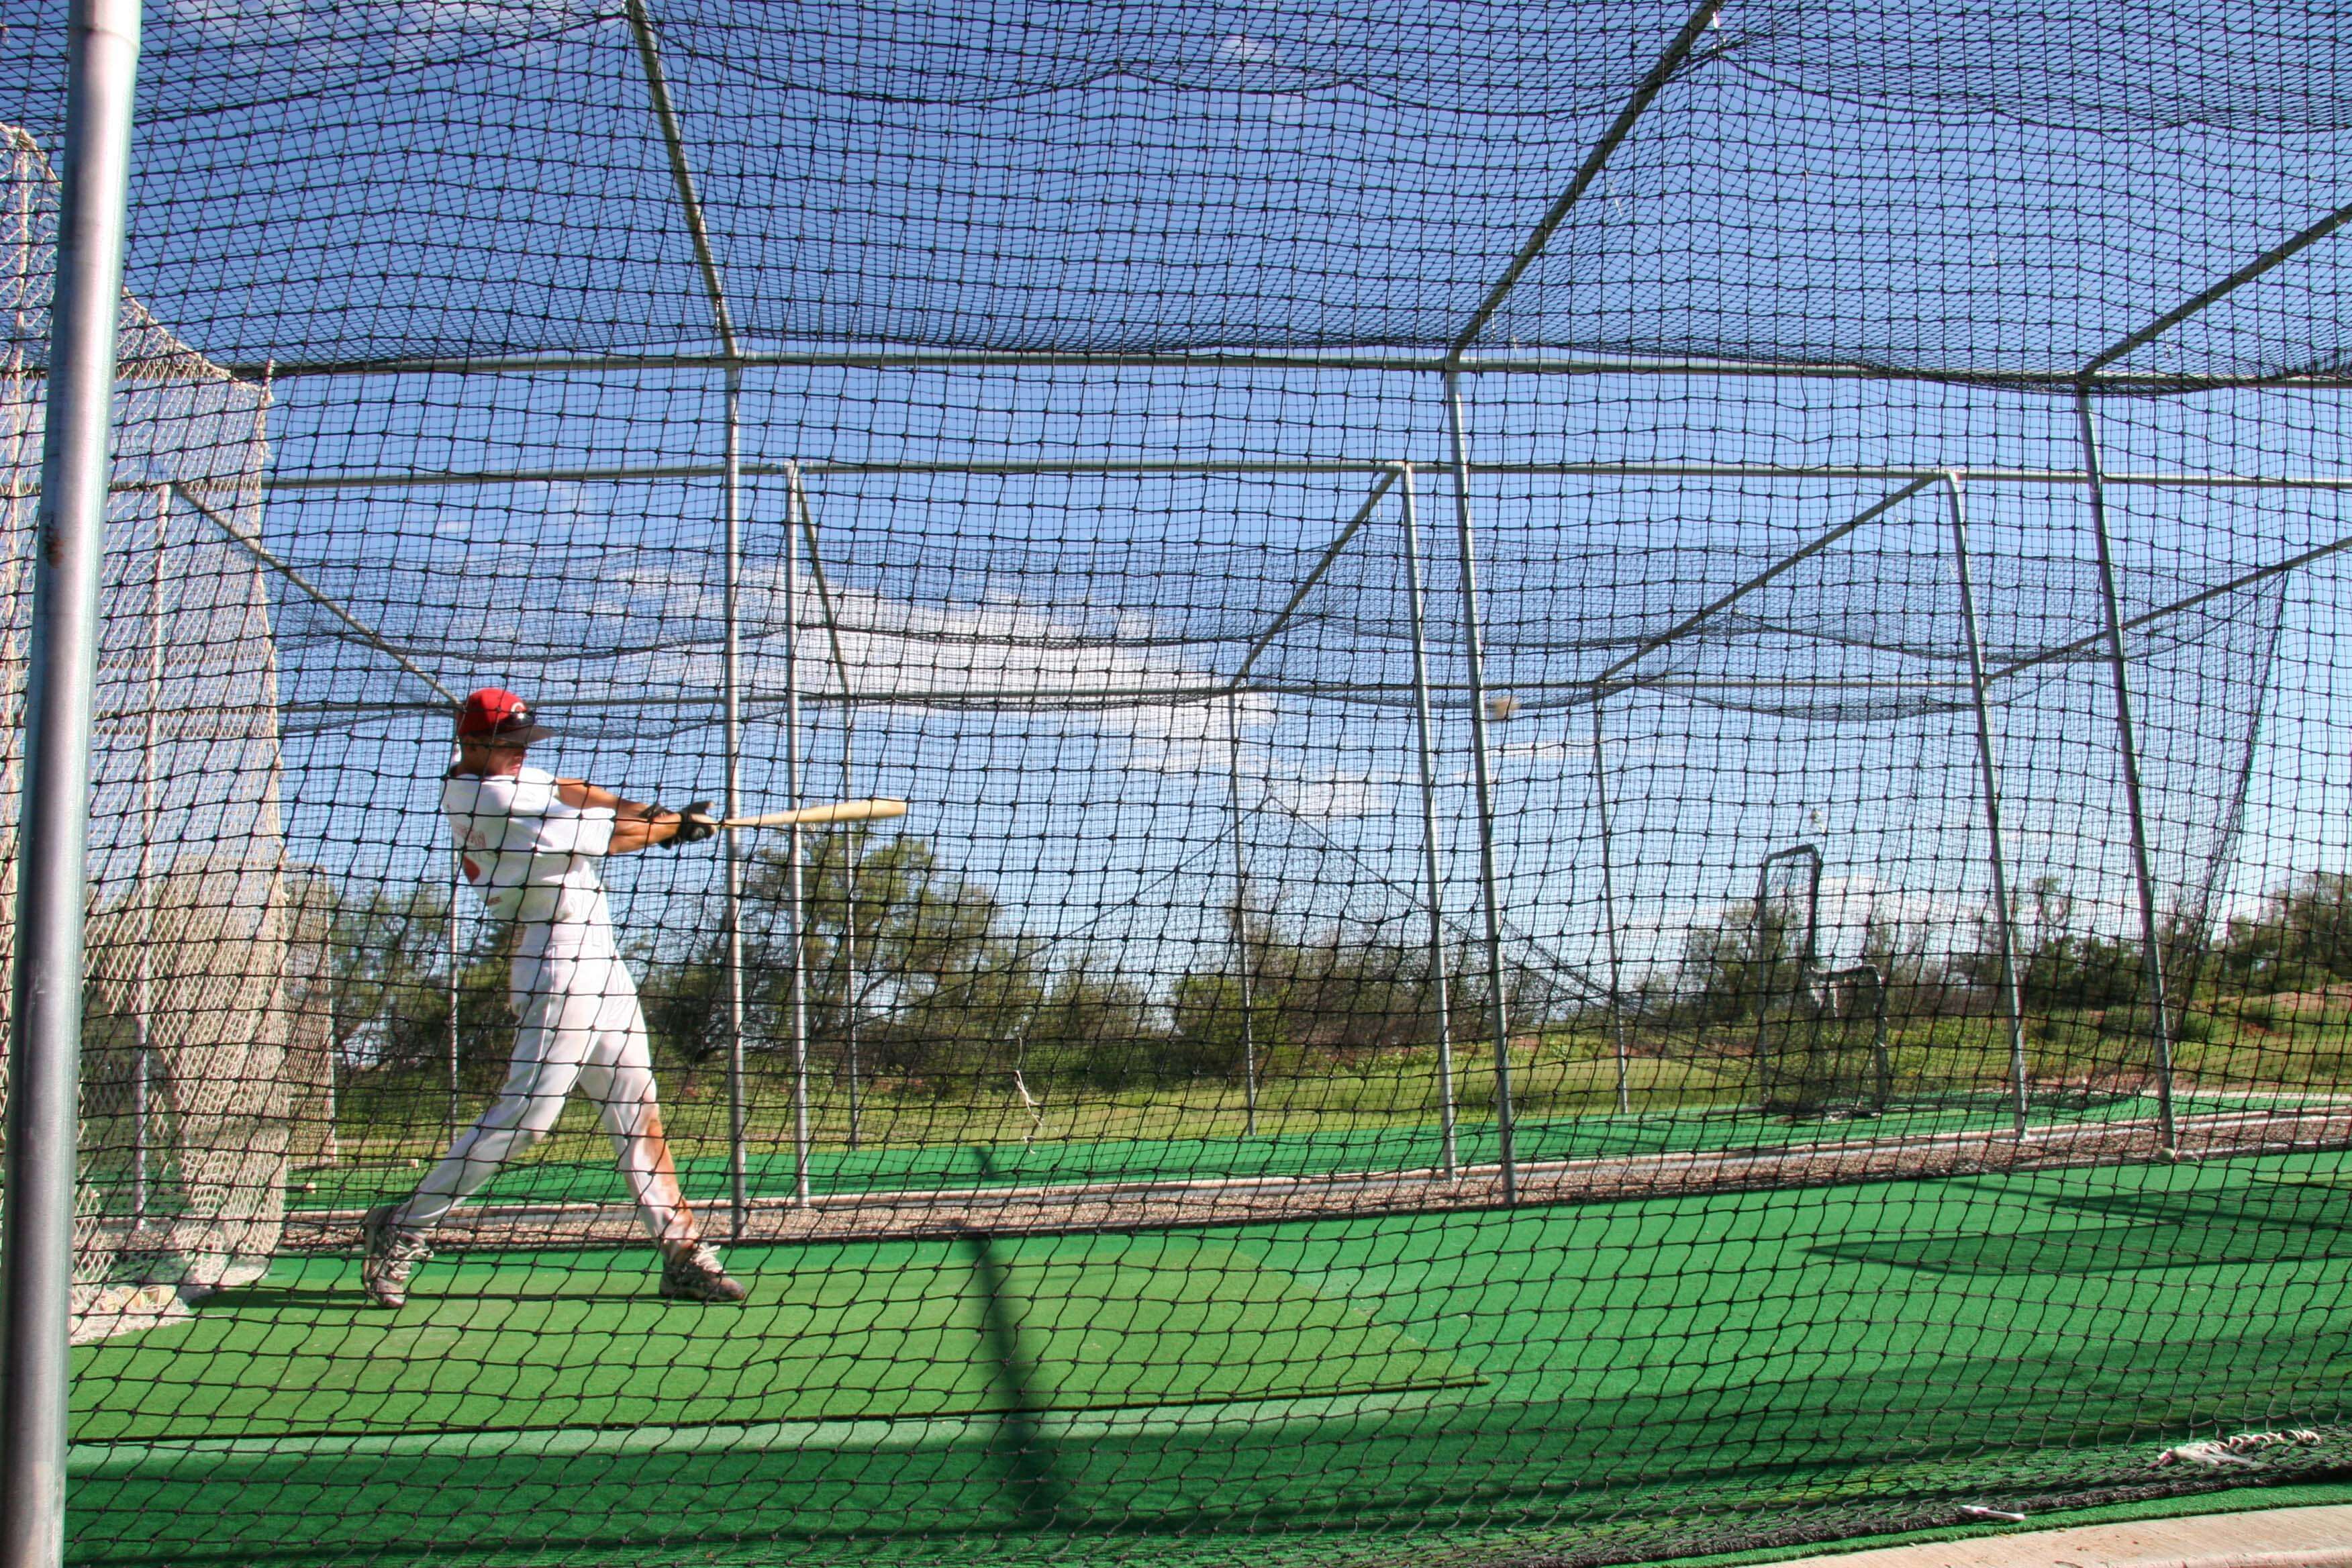 Details about  /  20/' x 19/' BLACK SQUARE NYLON NETTING BARRIER BACKSTOP BASEBALL CAGE NET 2/"  #18